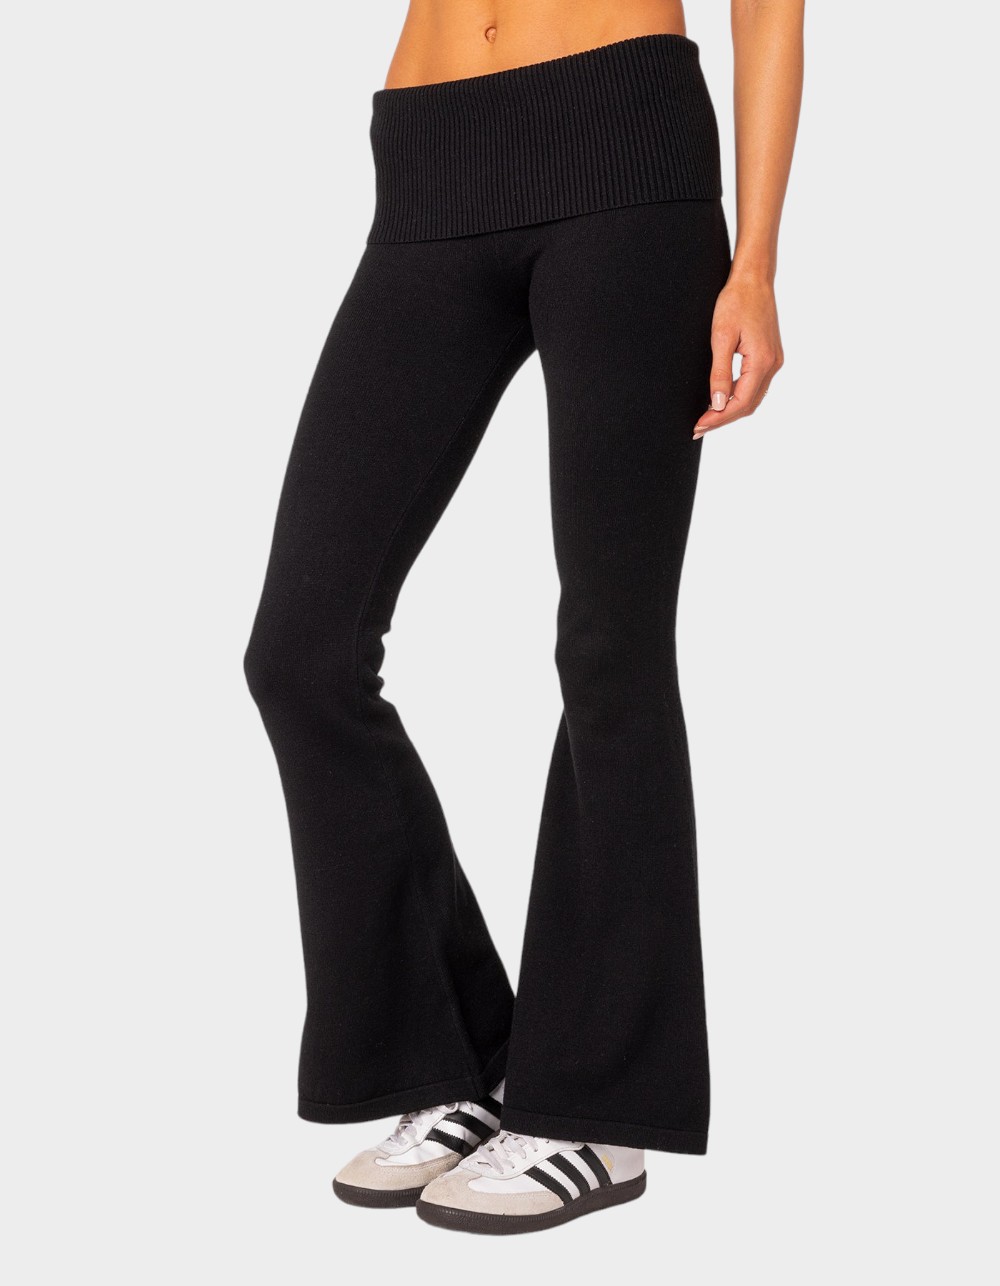 EDIKTED Desiree Knitted Low Rise Fold Over Pants - BLACK